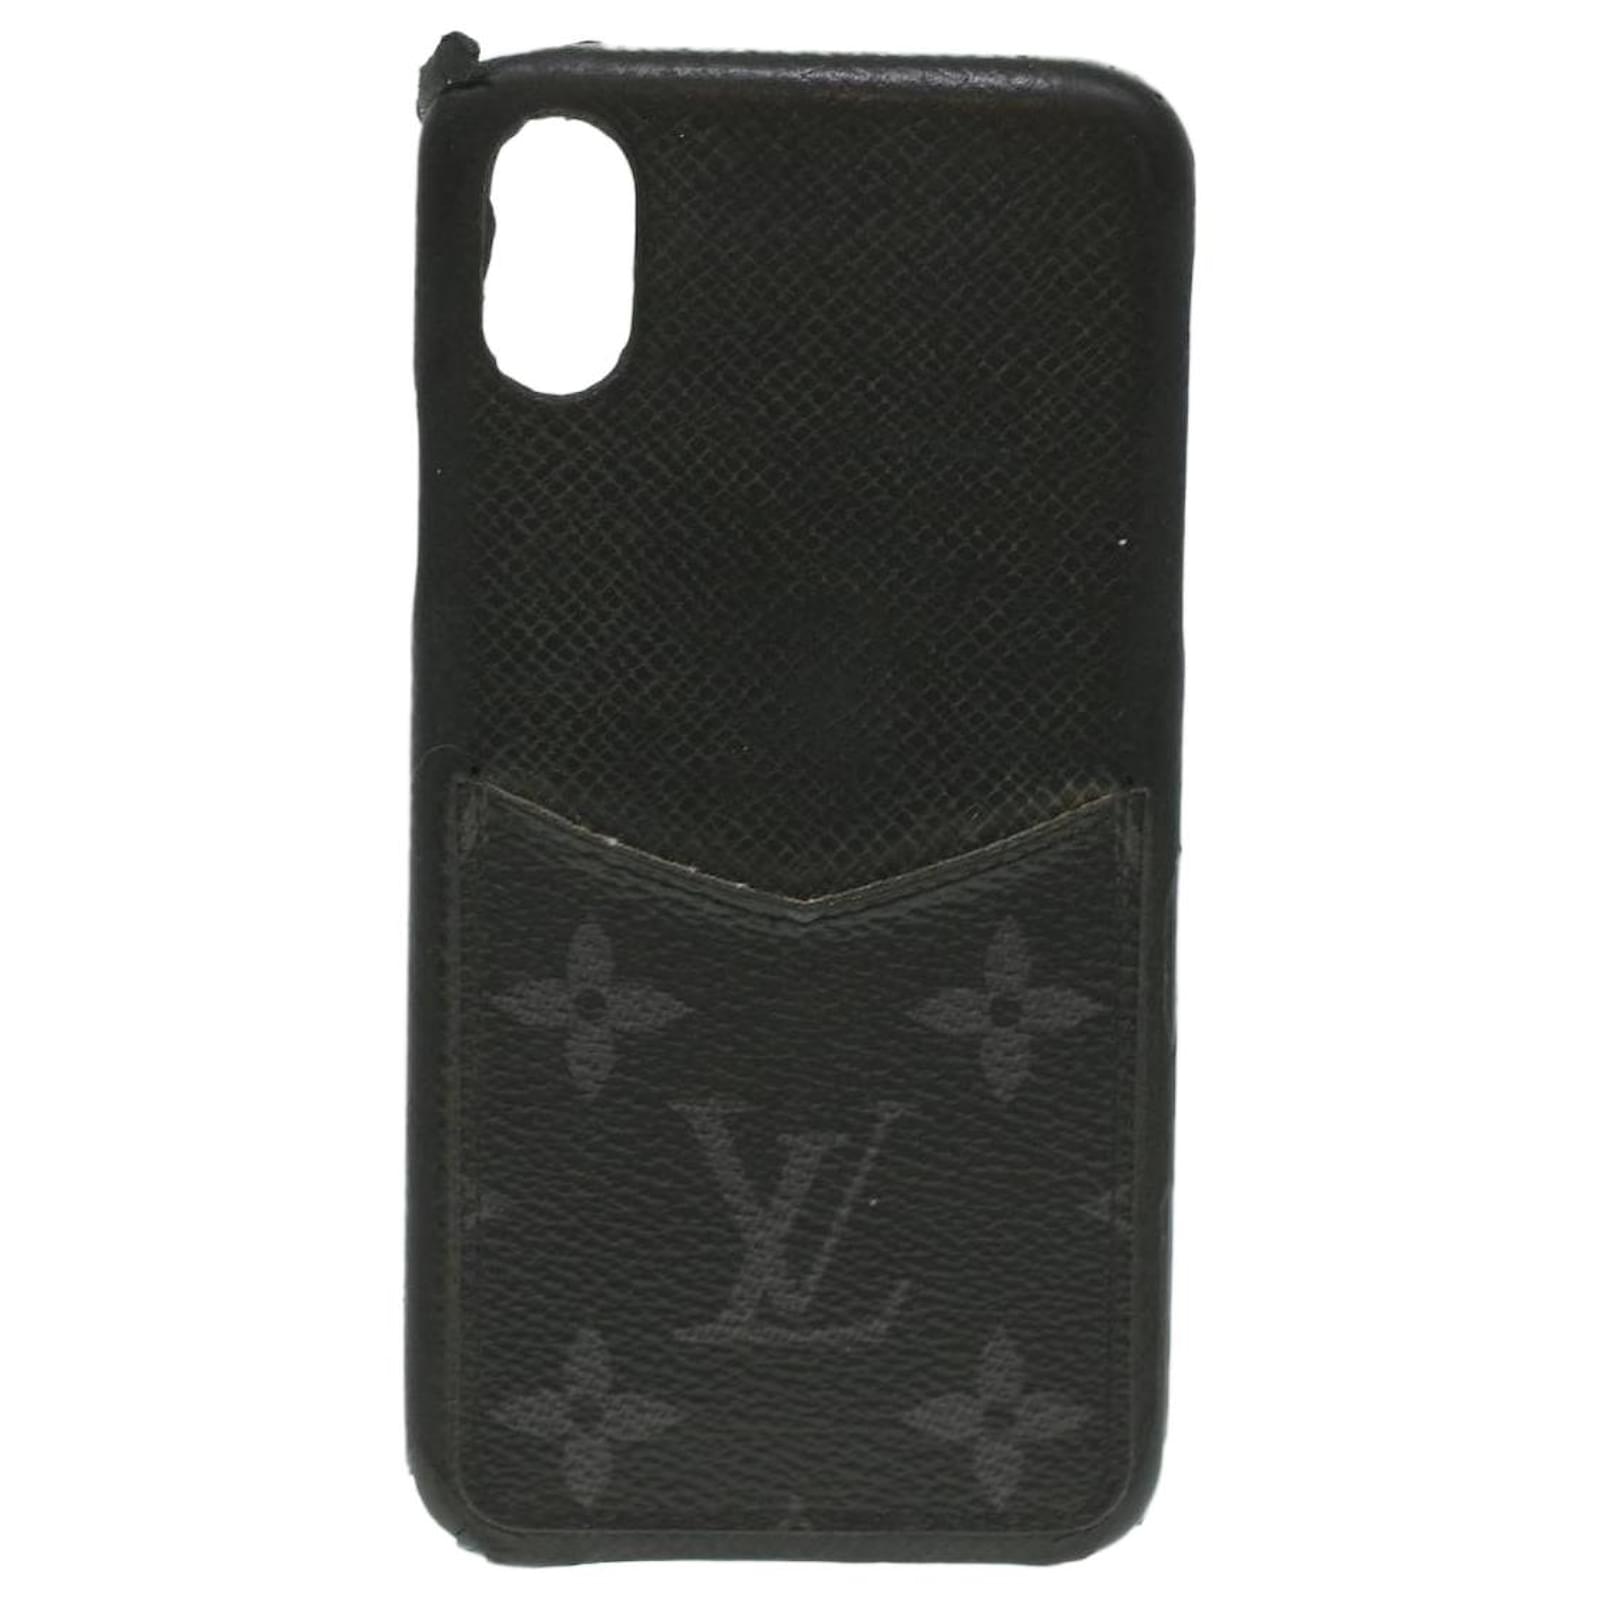 Pre-Owned Louis Vuitton Cover iPhone X Xs Folio Red Scarlet